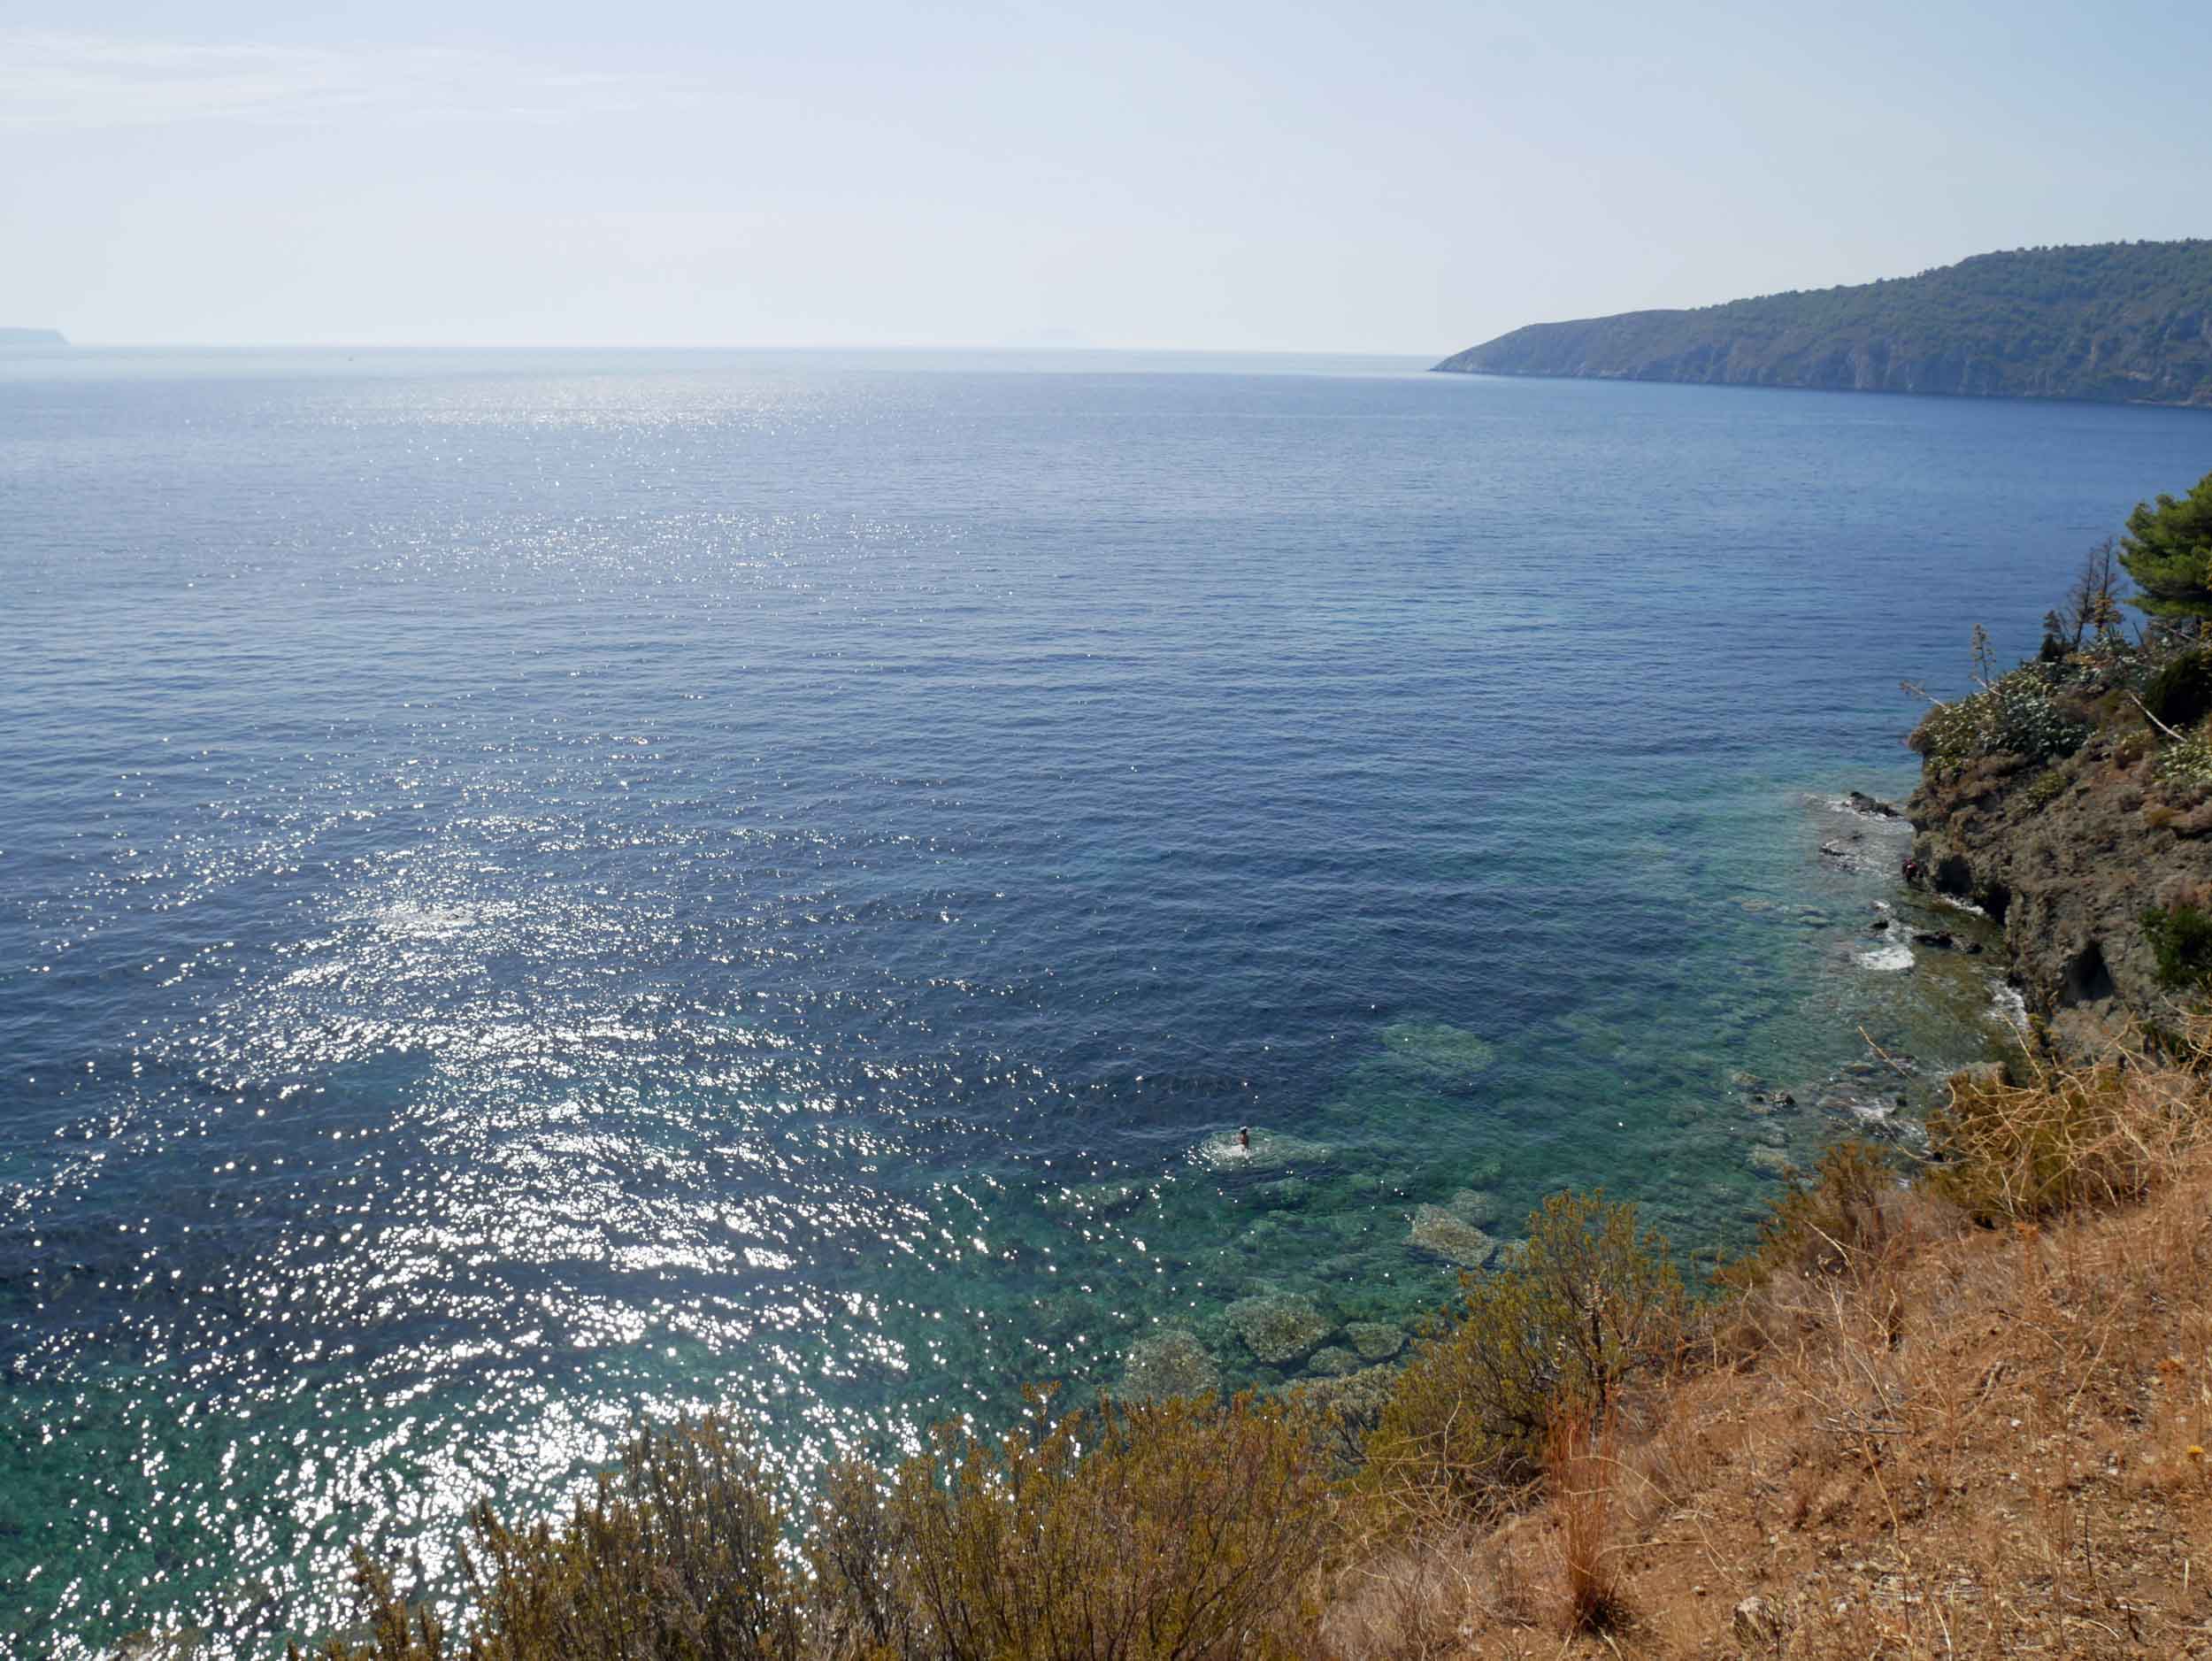  The panoramic view of the Adriatic as we made our way each morning to our little alcove on the shore.&nbsp; 